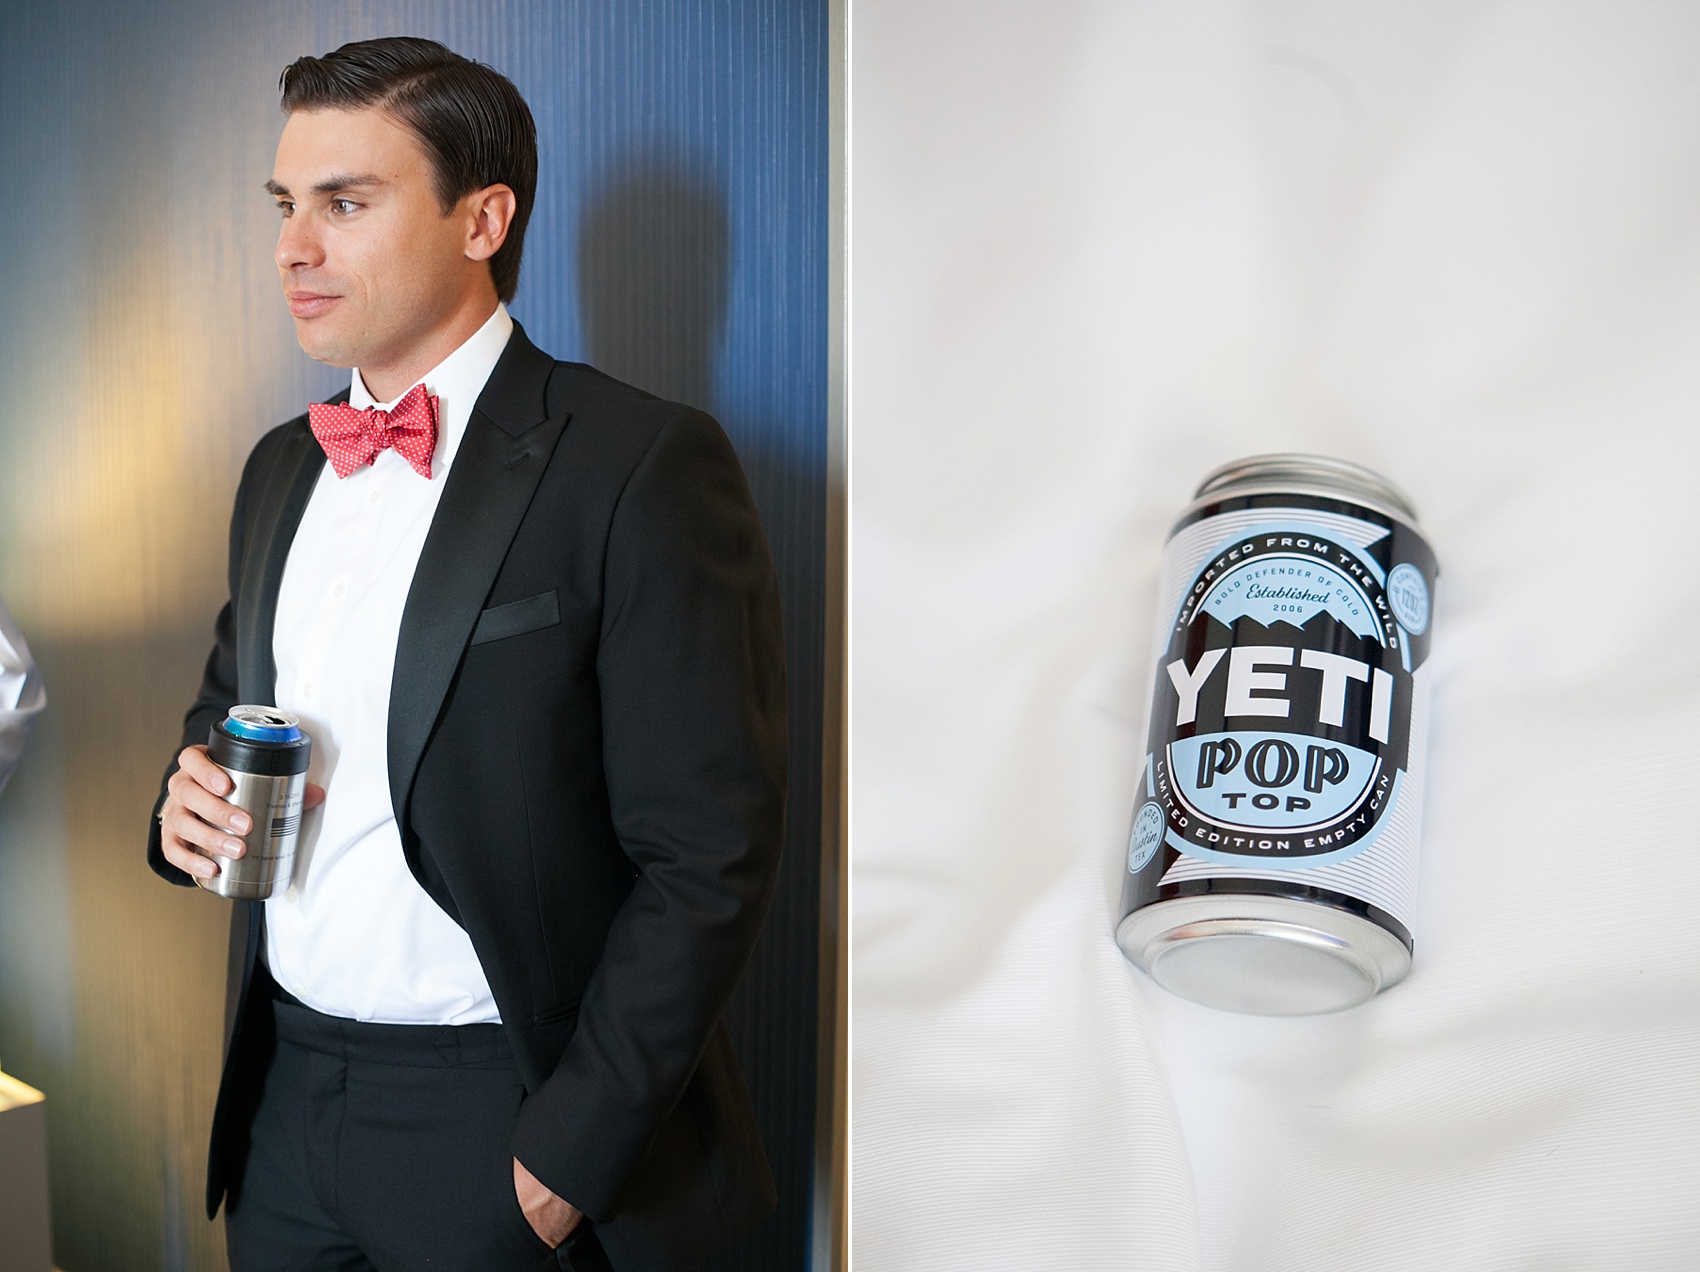 Groom getting ready images at W Union Square by NYC wedding photographer, Mikkel Paige Photography. Yeti Pop for the groomsmen gifts.